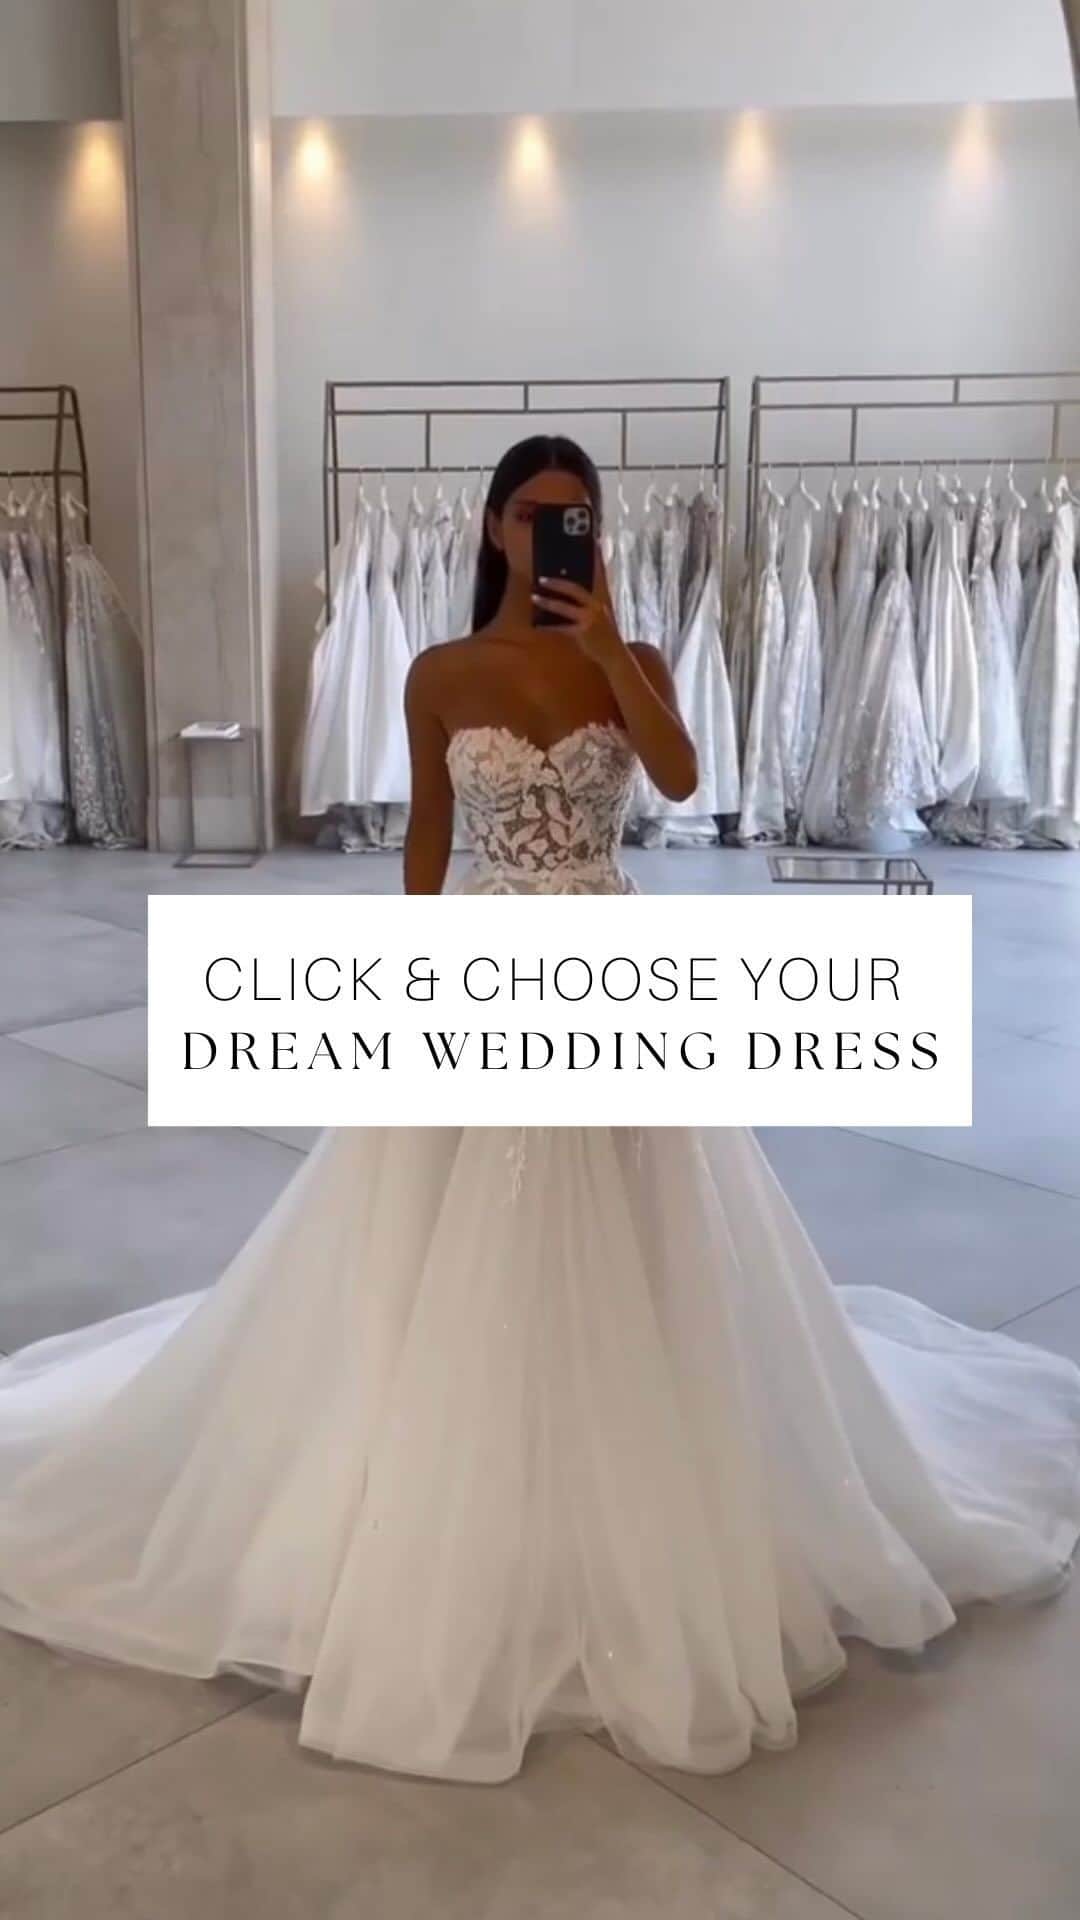 WEDDING APPARELのインスタグラム：「Whether your bridal style is romantic, ethereal, sexy, or classic @karozabridalinc has the perfect option for you! Which one of these beauties caught your eye? Tell us in the comments below ⬇️   Video by: @karozabridalinc  #weddinggown #weddingfashion #weddingdress #weddings #bridalgown #bridaldress #bridalstyle #engaged #bridetobe #ballgown #weddingday #2023bride #2023weddings #bridalfashion #weddingdetails #dresses #glamdress #bridal #glambride #luxurywedding #mermaidweddingdress #alineweddinggown #tulleweddingdress #laceweddingdress #bridalaccessories #longsleeveweddingdress #straplessweddingdress #satinweddingdress」